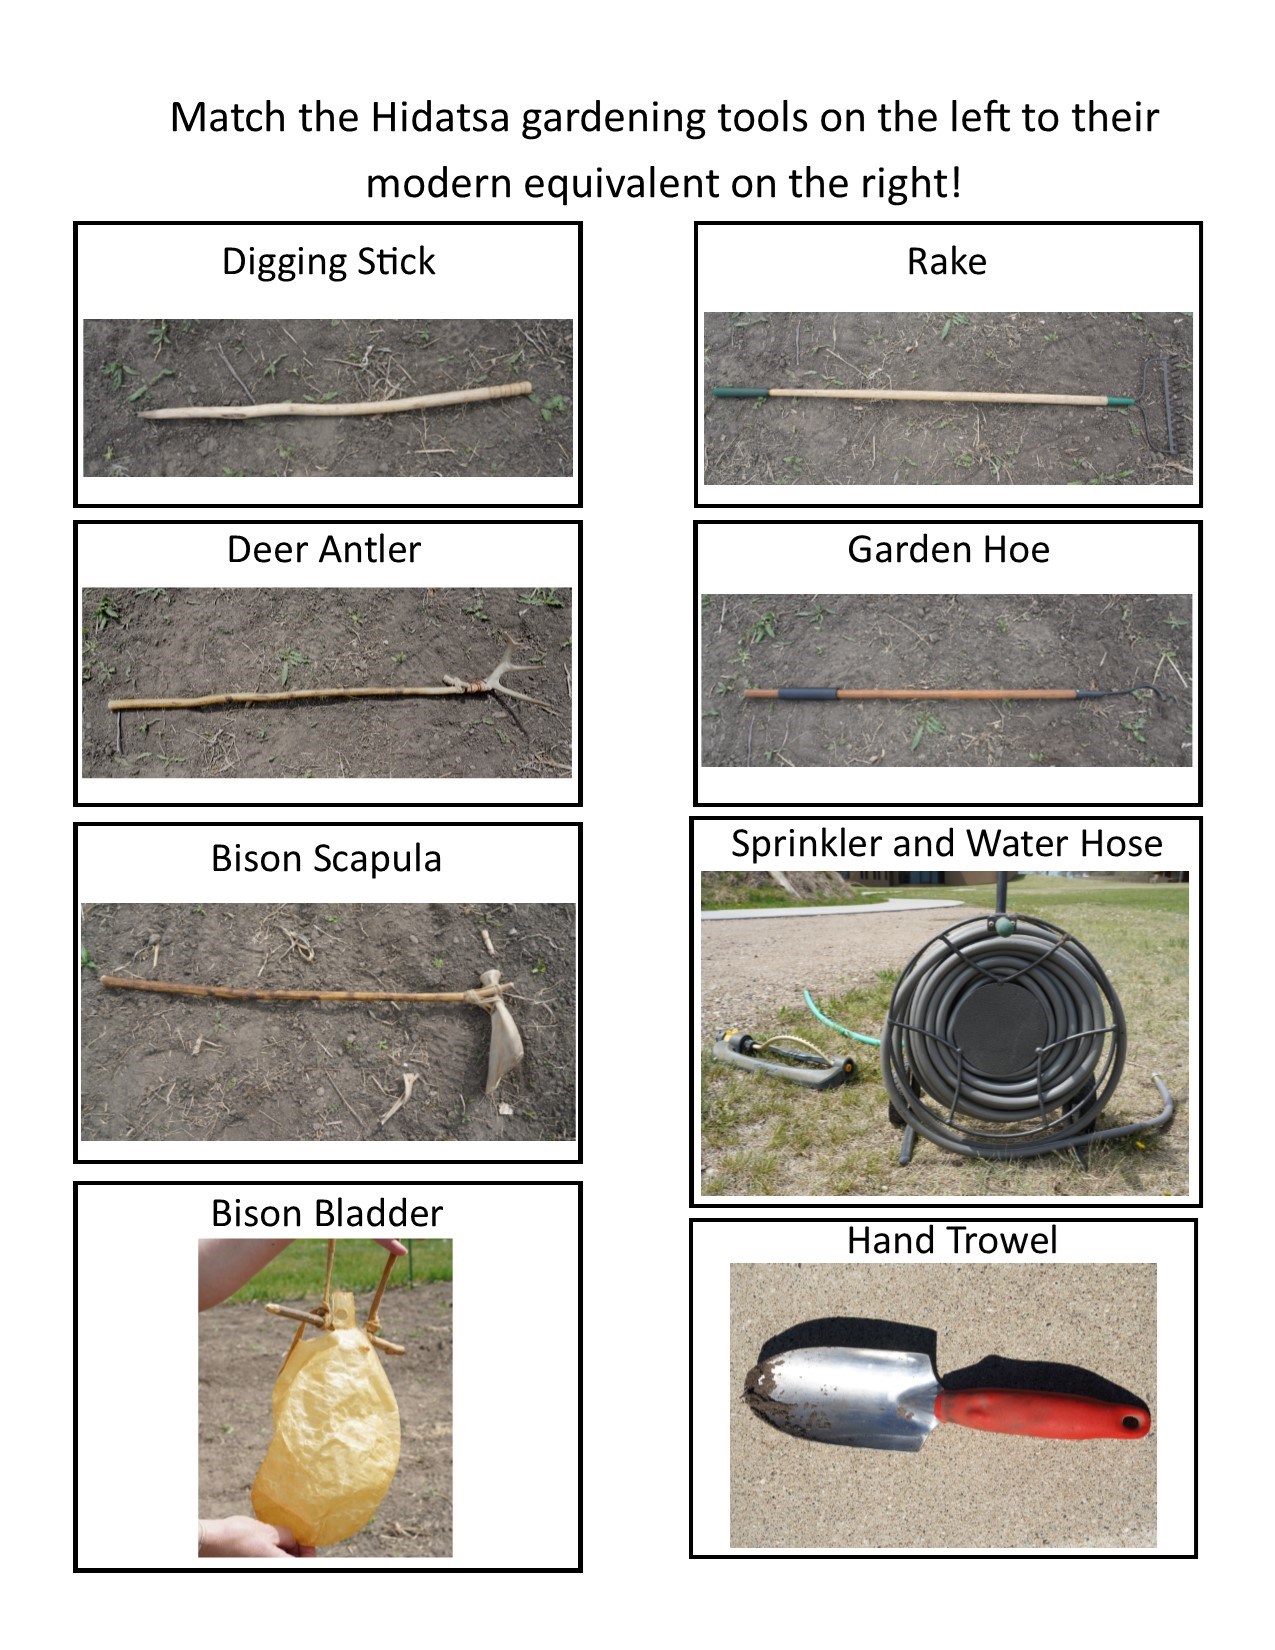 Eight images split into sections with four Hidatsa gardening tools on the left and four modern gardening tools on the right.